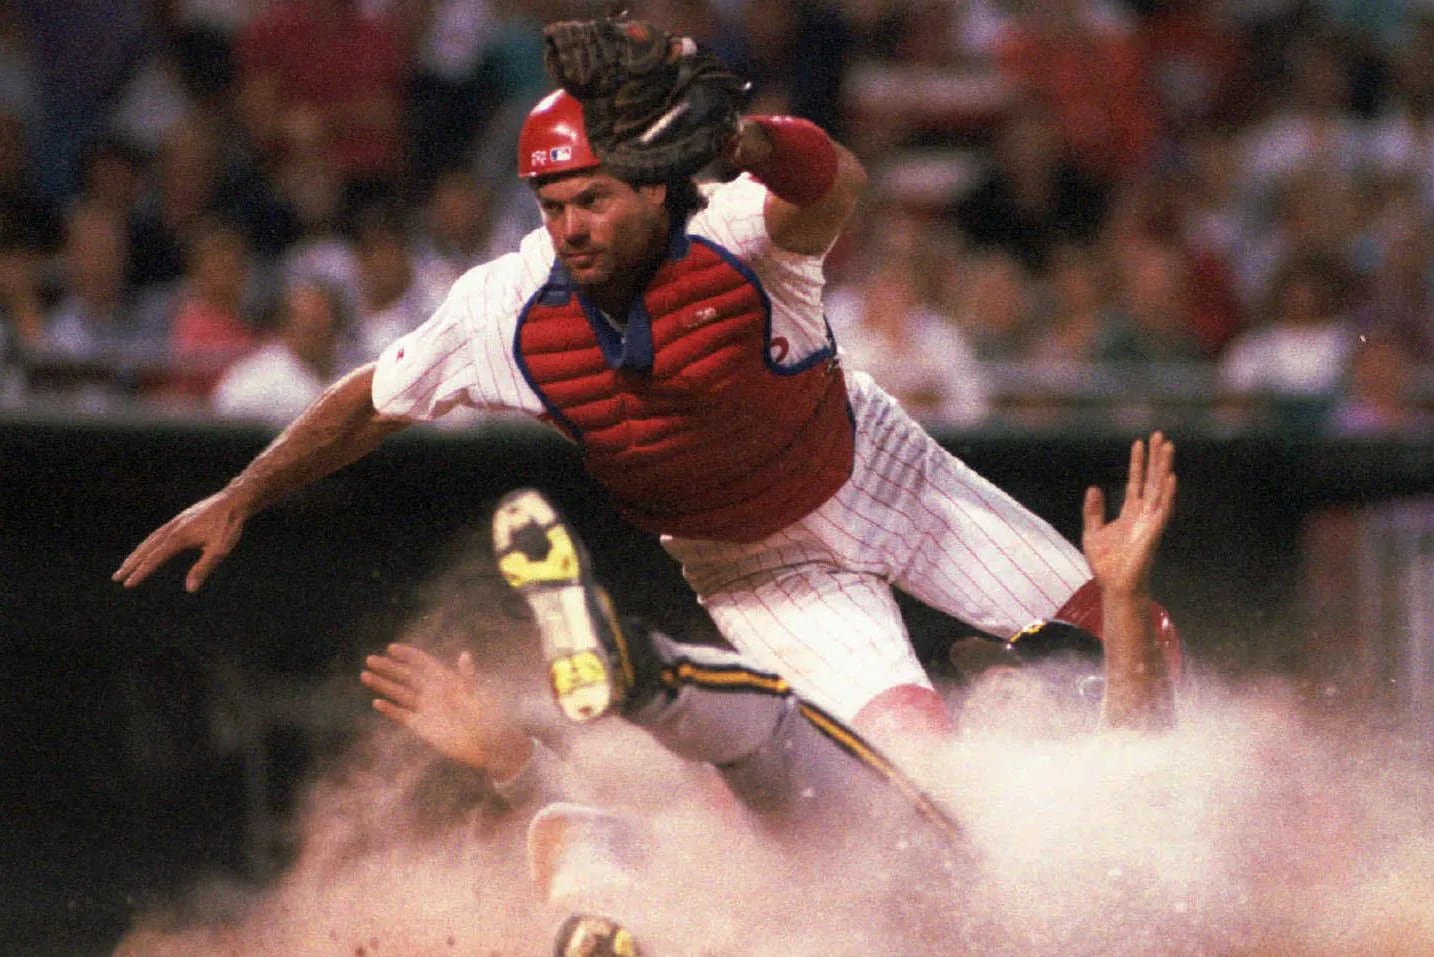 Darren Daulton's family believes the Phillies icon's struggles and